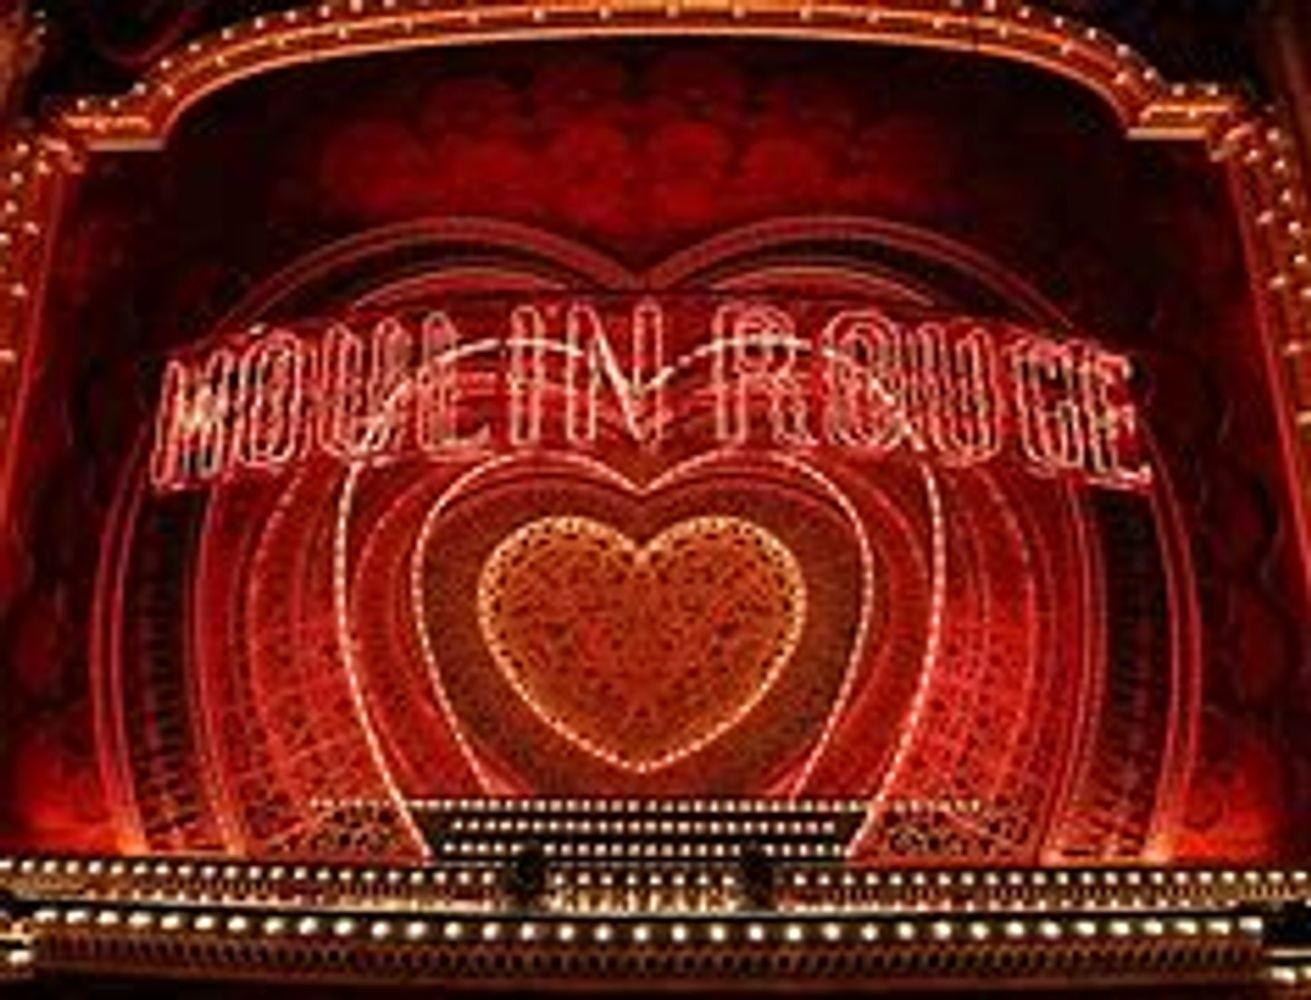 "Moulin Rouge" on Broadway